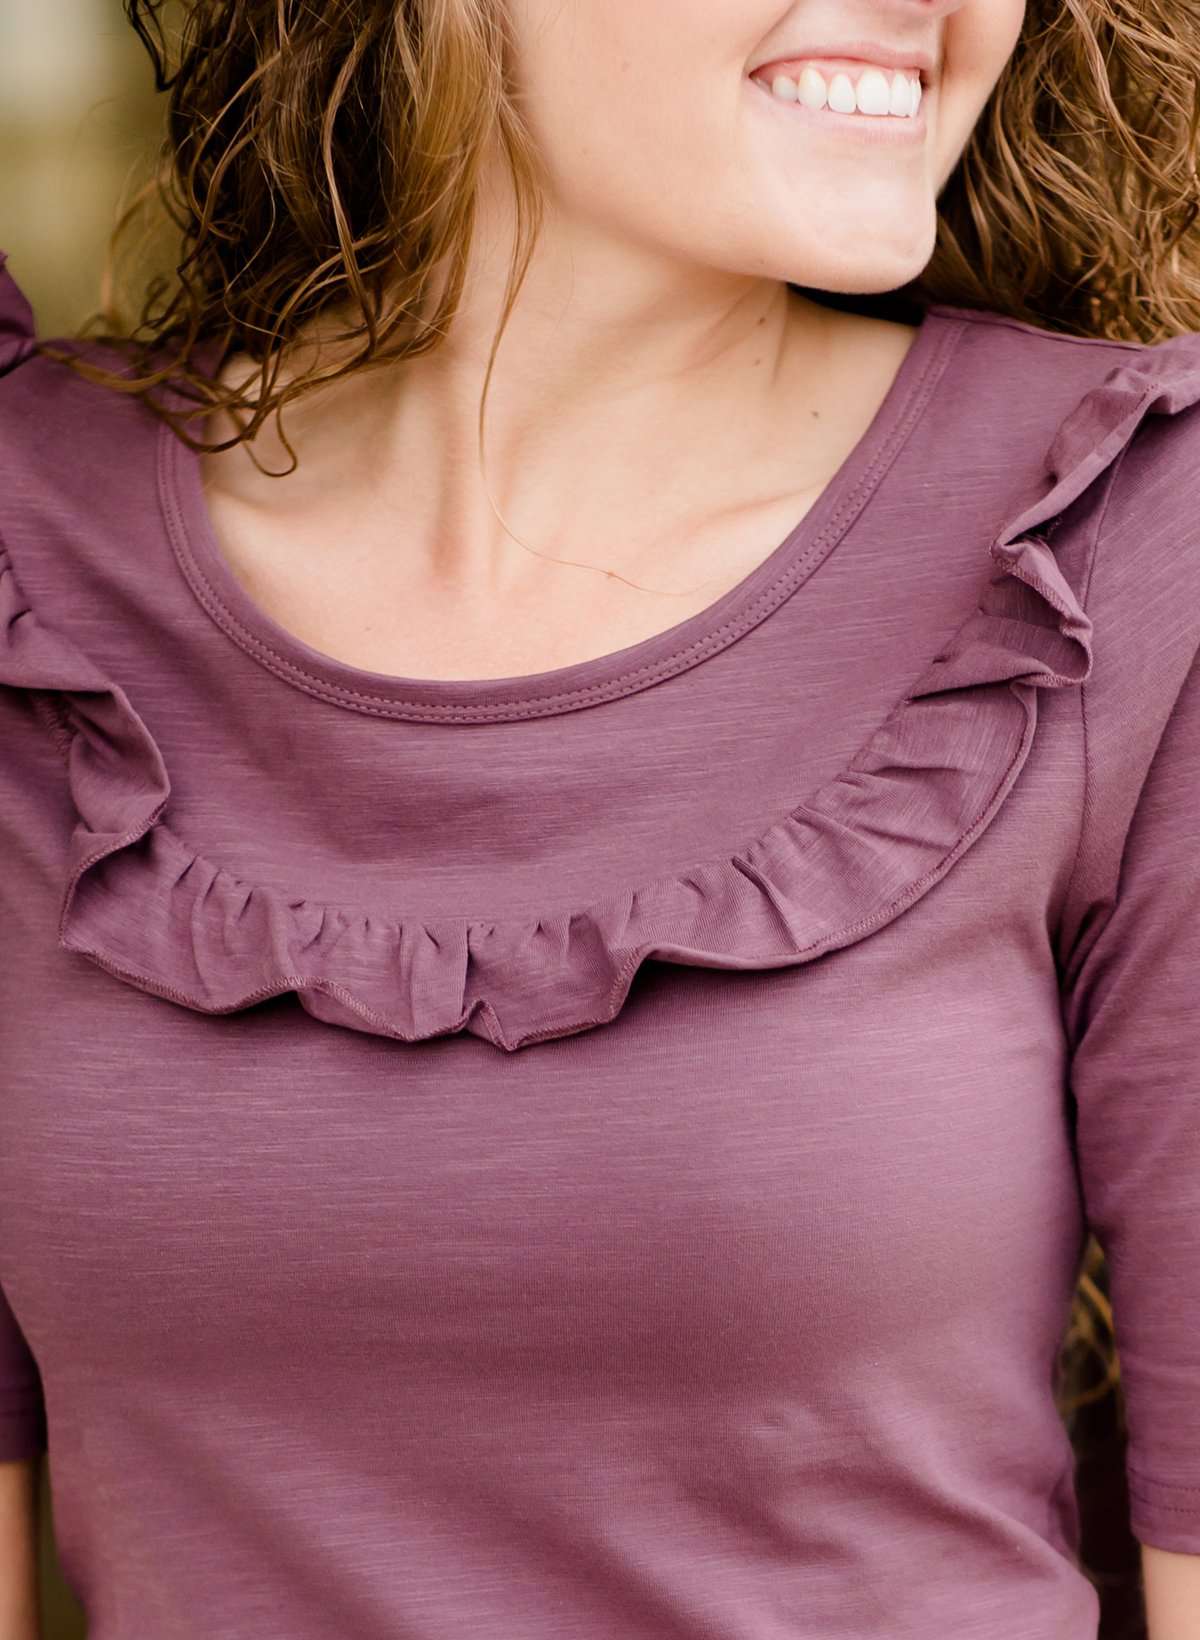 Modest women's affordable ruffle half sleeve top in plum or white